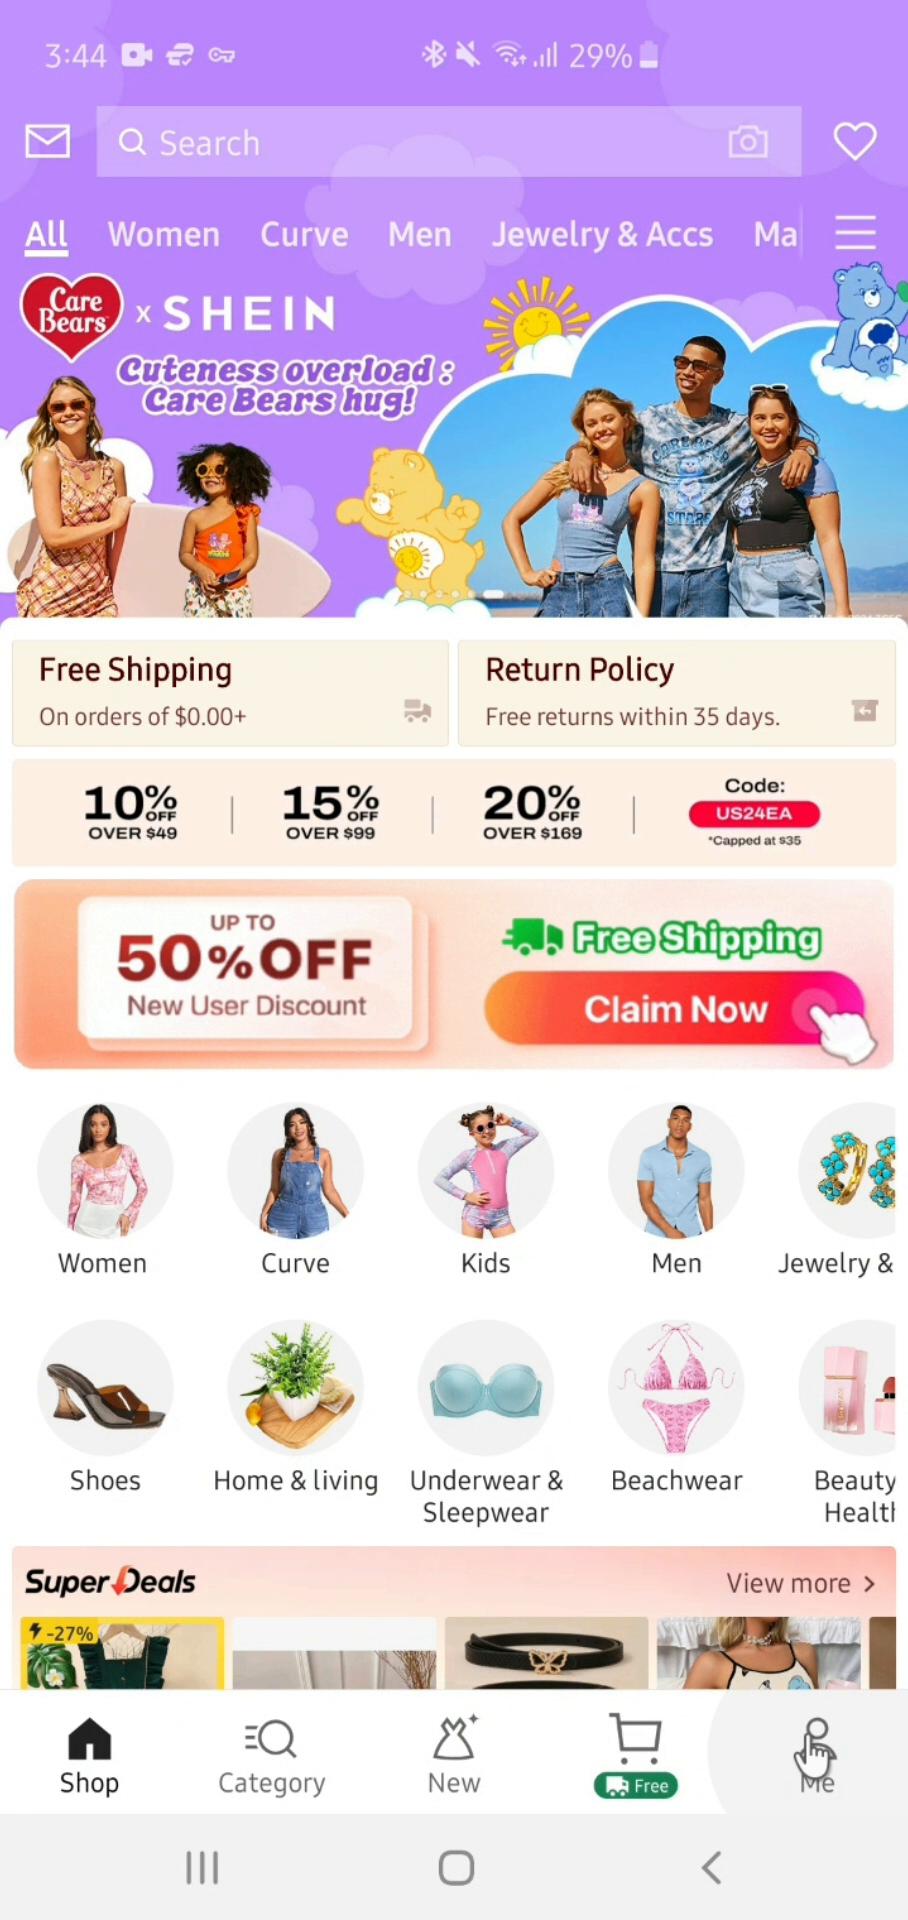 Updating your profile on Shein video screenshot